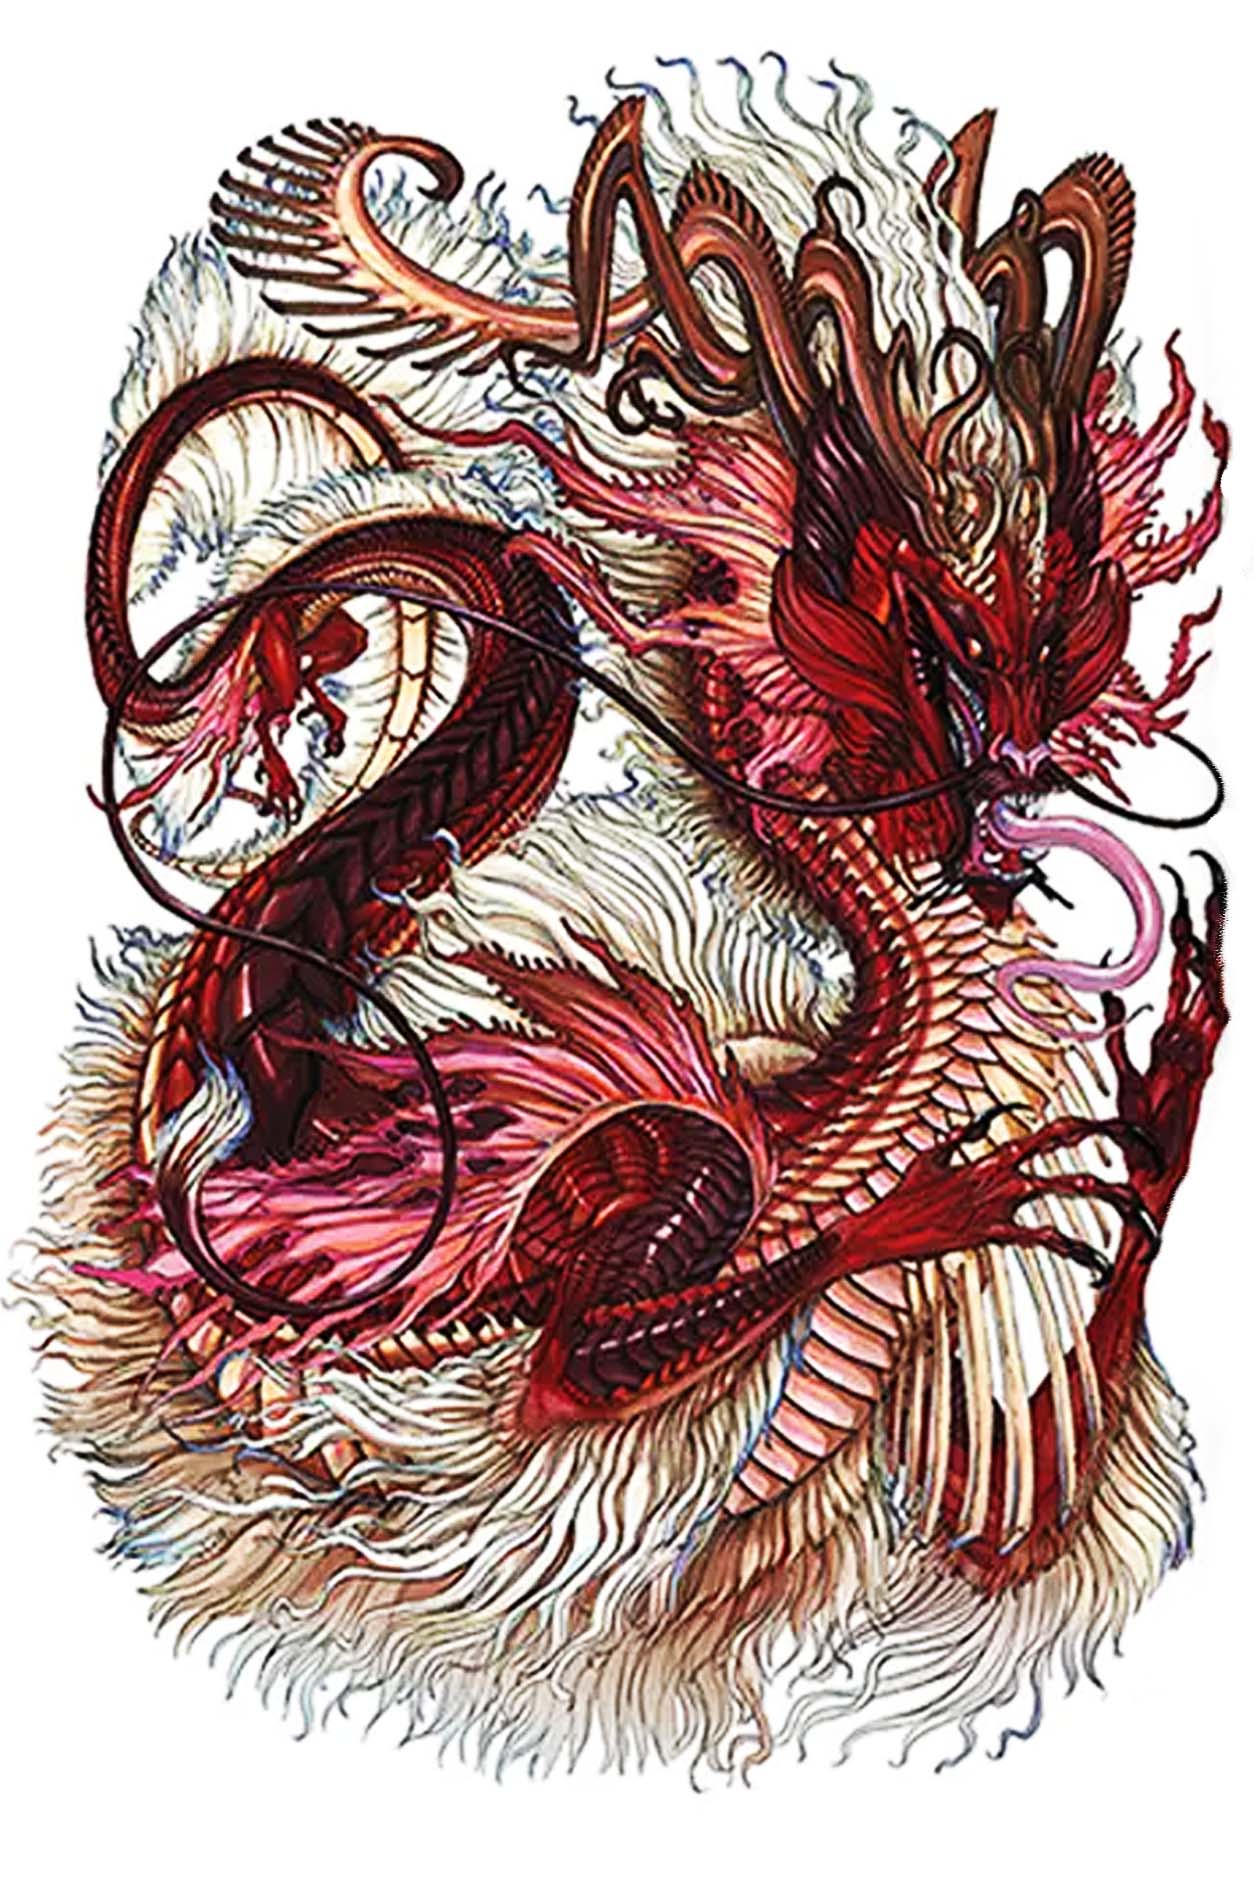 A giant full-body dragon graces this back tattoo in all of his mature glory. He shows all his features, from horns, scales, feathers, claws, beard, and even his long pink tongue. Enjoy this dynamic piece of artwork on your next beach trip. His colors are black and gray with shades of rose to maroon .